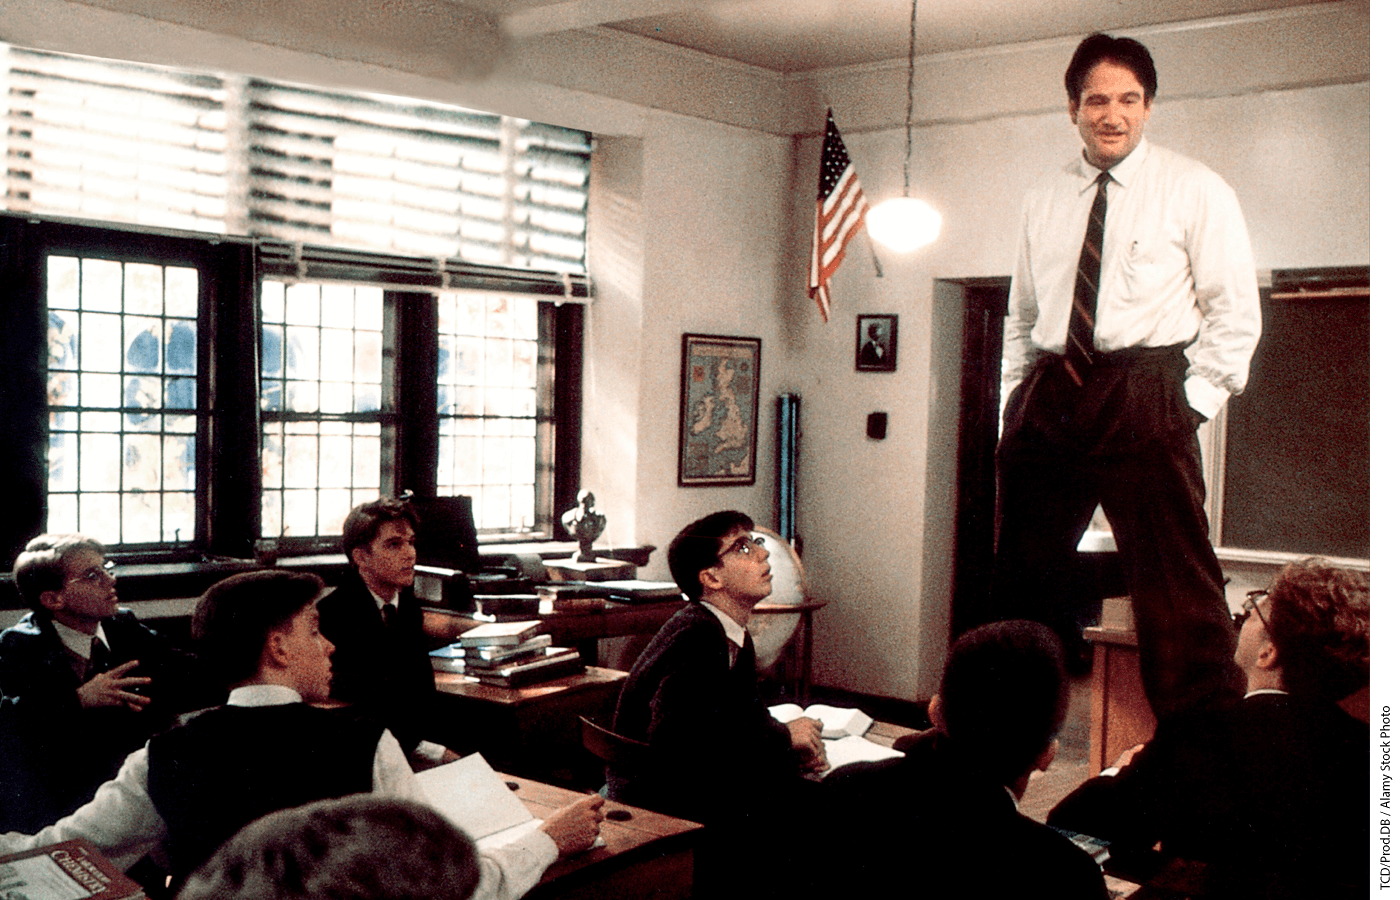 Robin Williams stands on his desk in the film Dead Poets Society